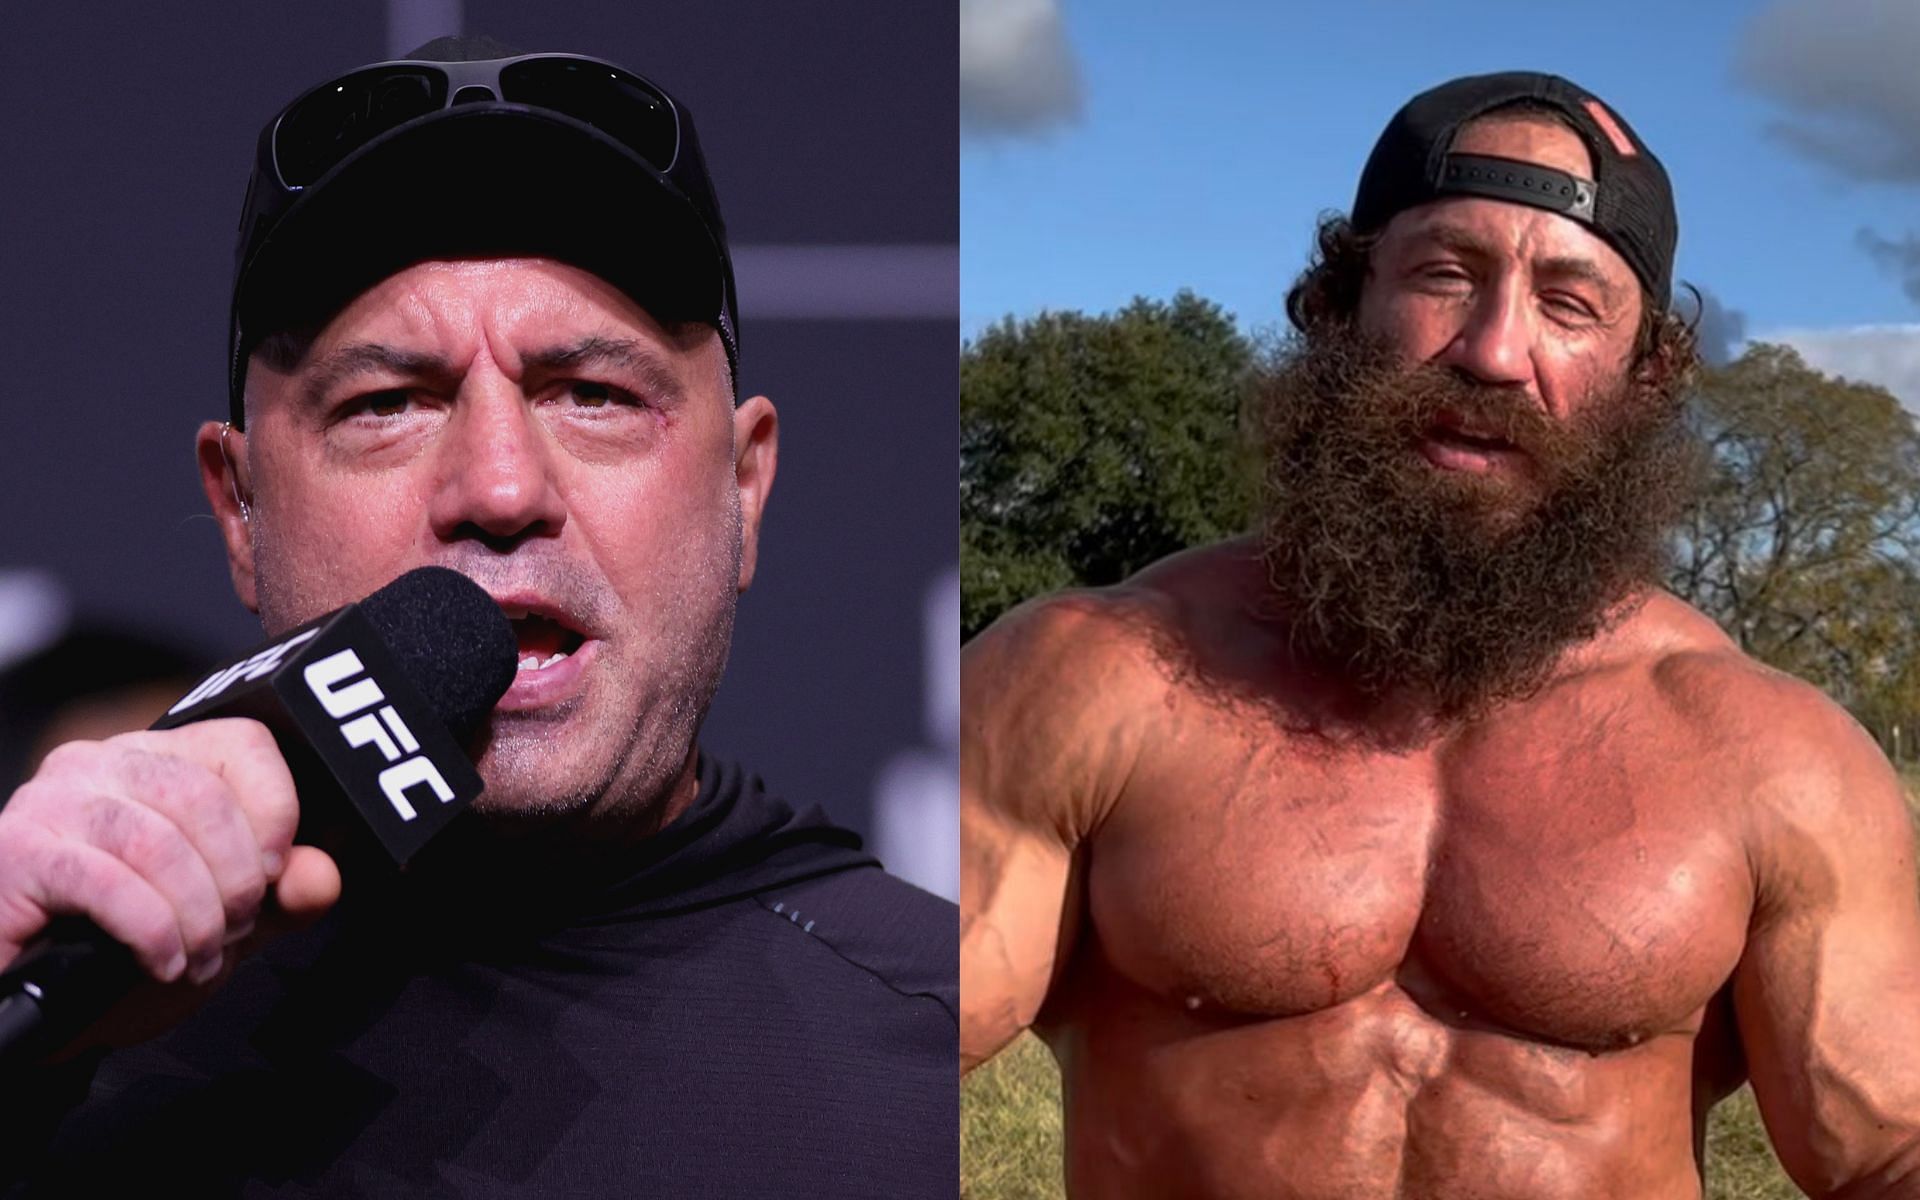 Joe Rogan (left) and Liver King (right) (Image credits Getty Images and @liverking on Instagram)